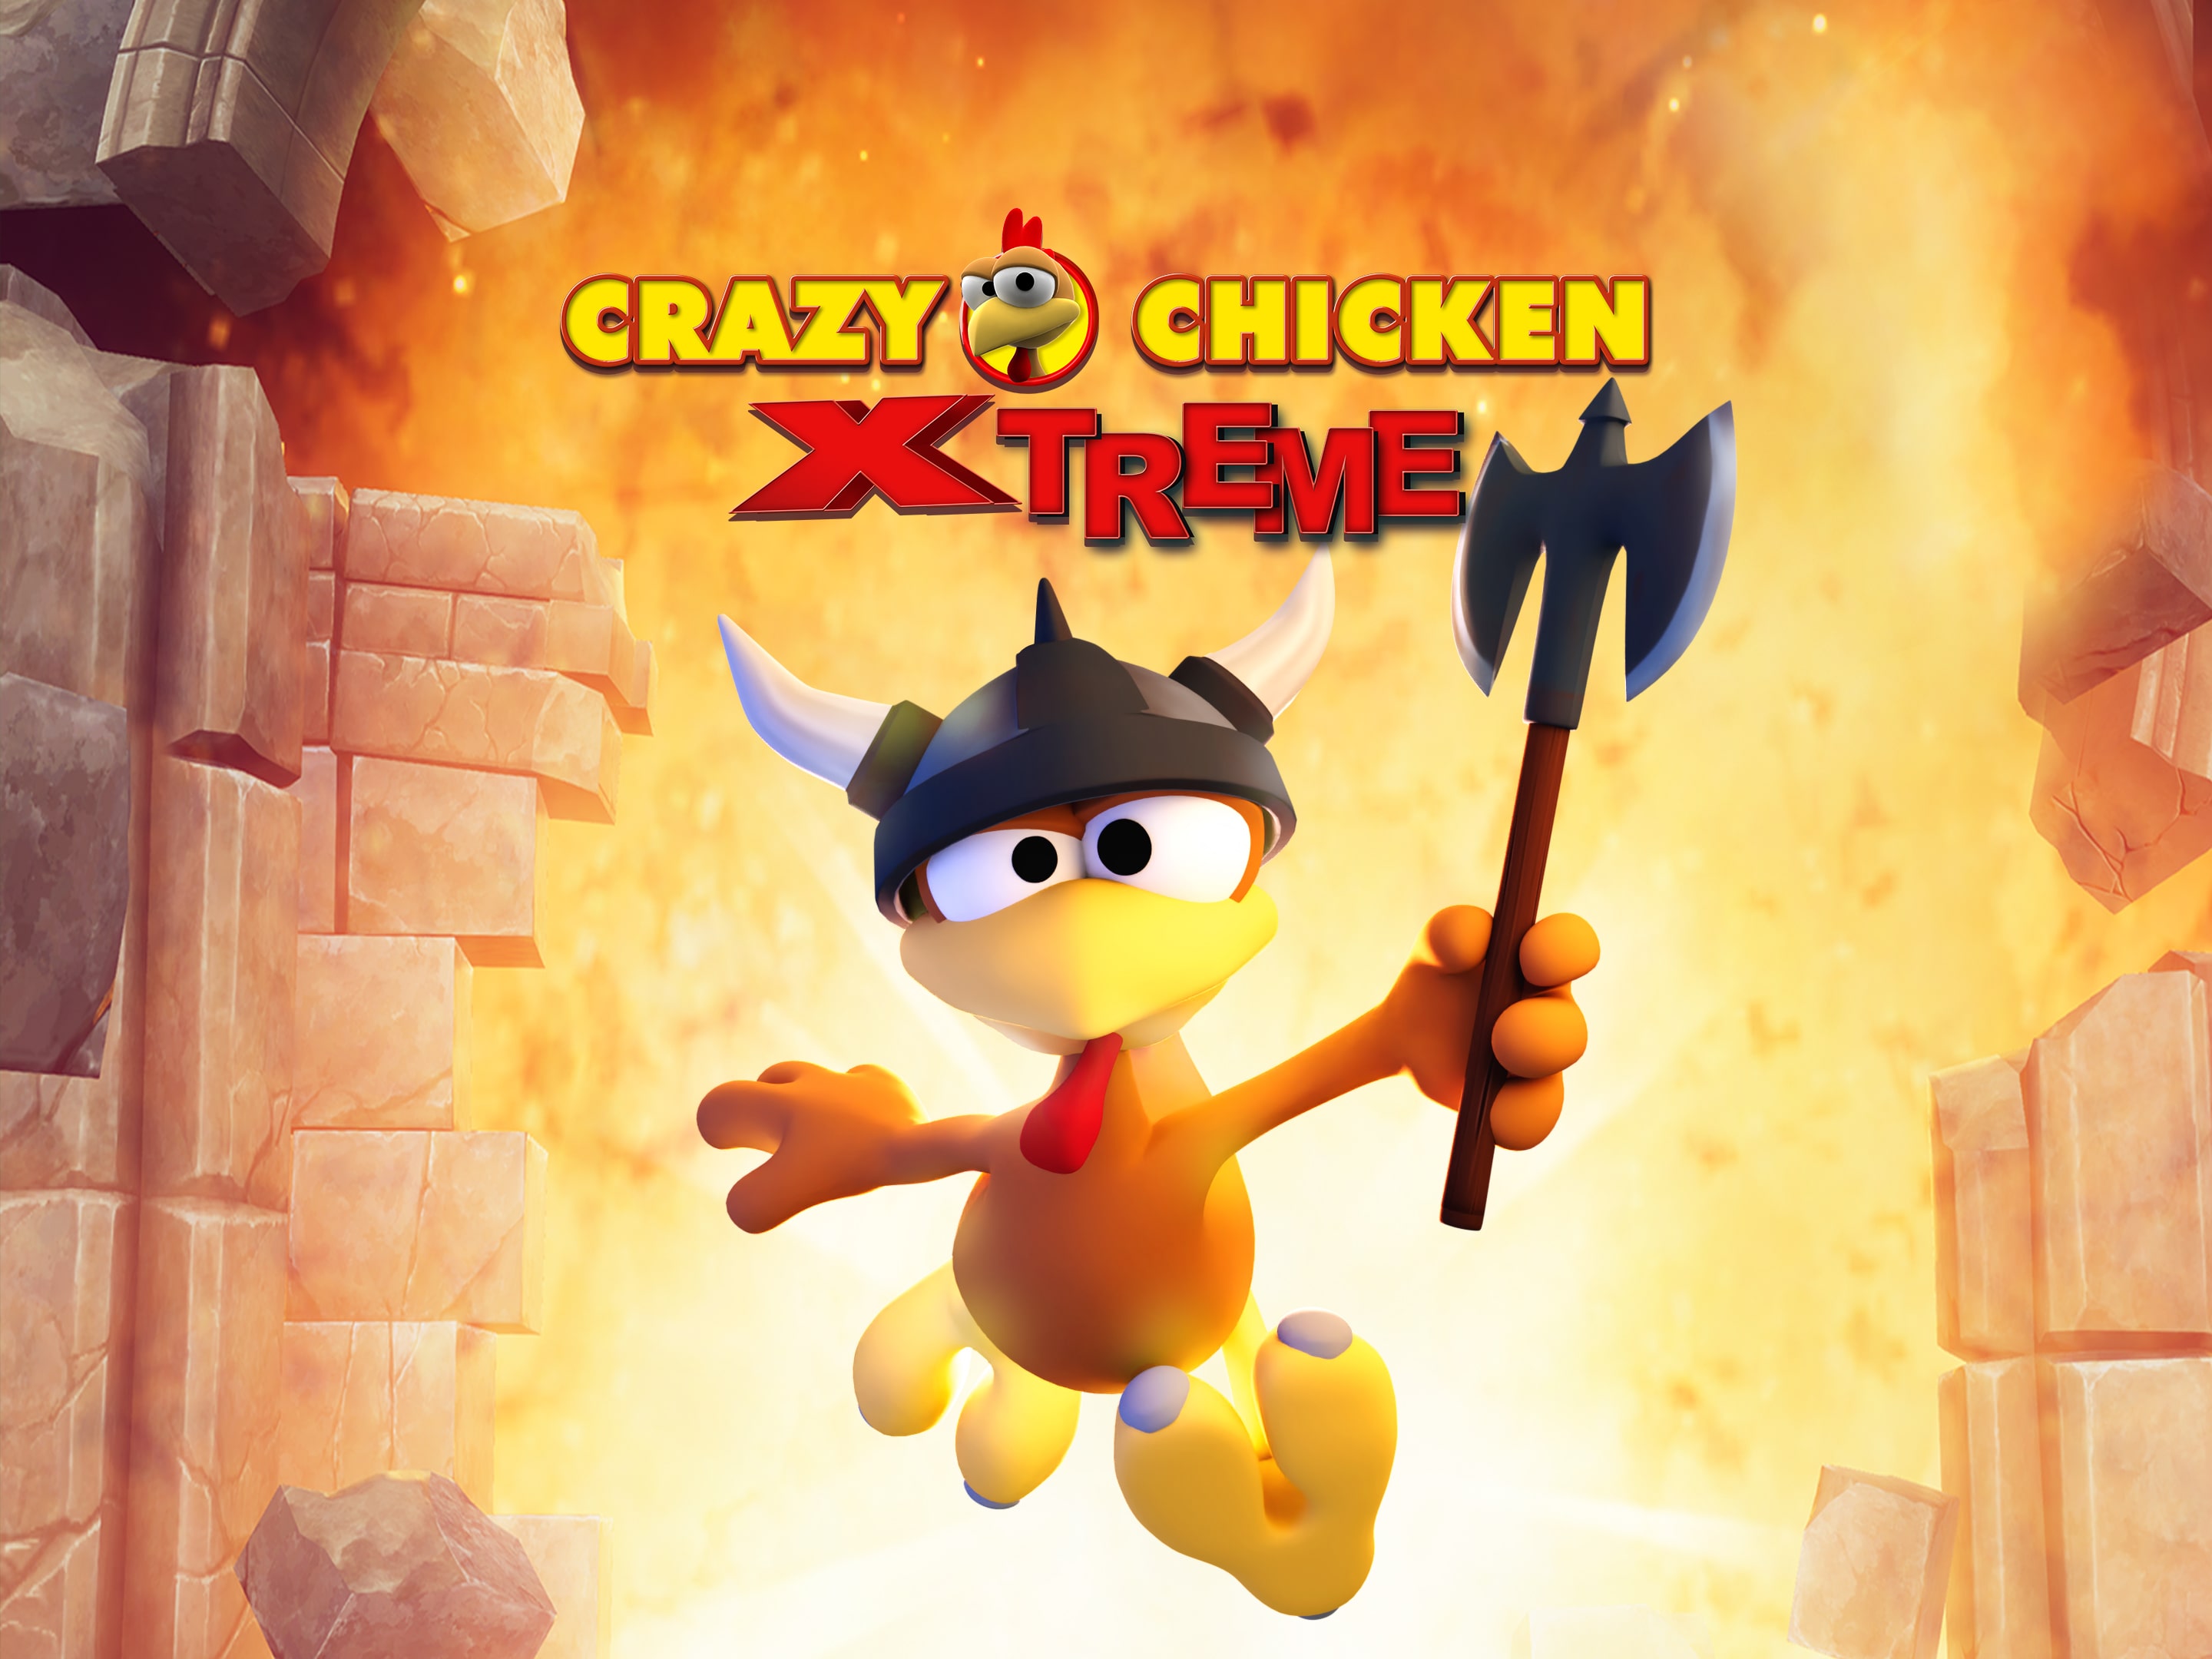  Crazy Chicken Xtreme - PlayStation 5 : Gs2 Games: Video Games